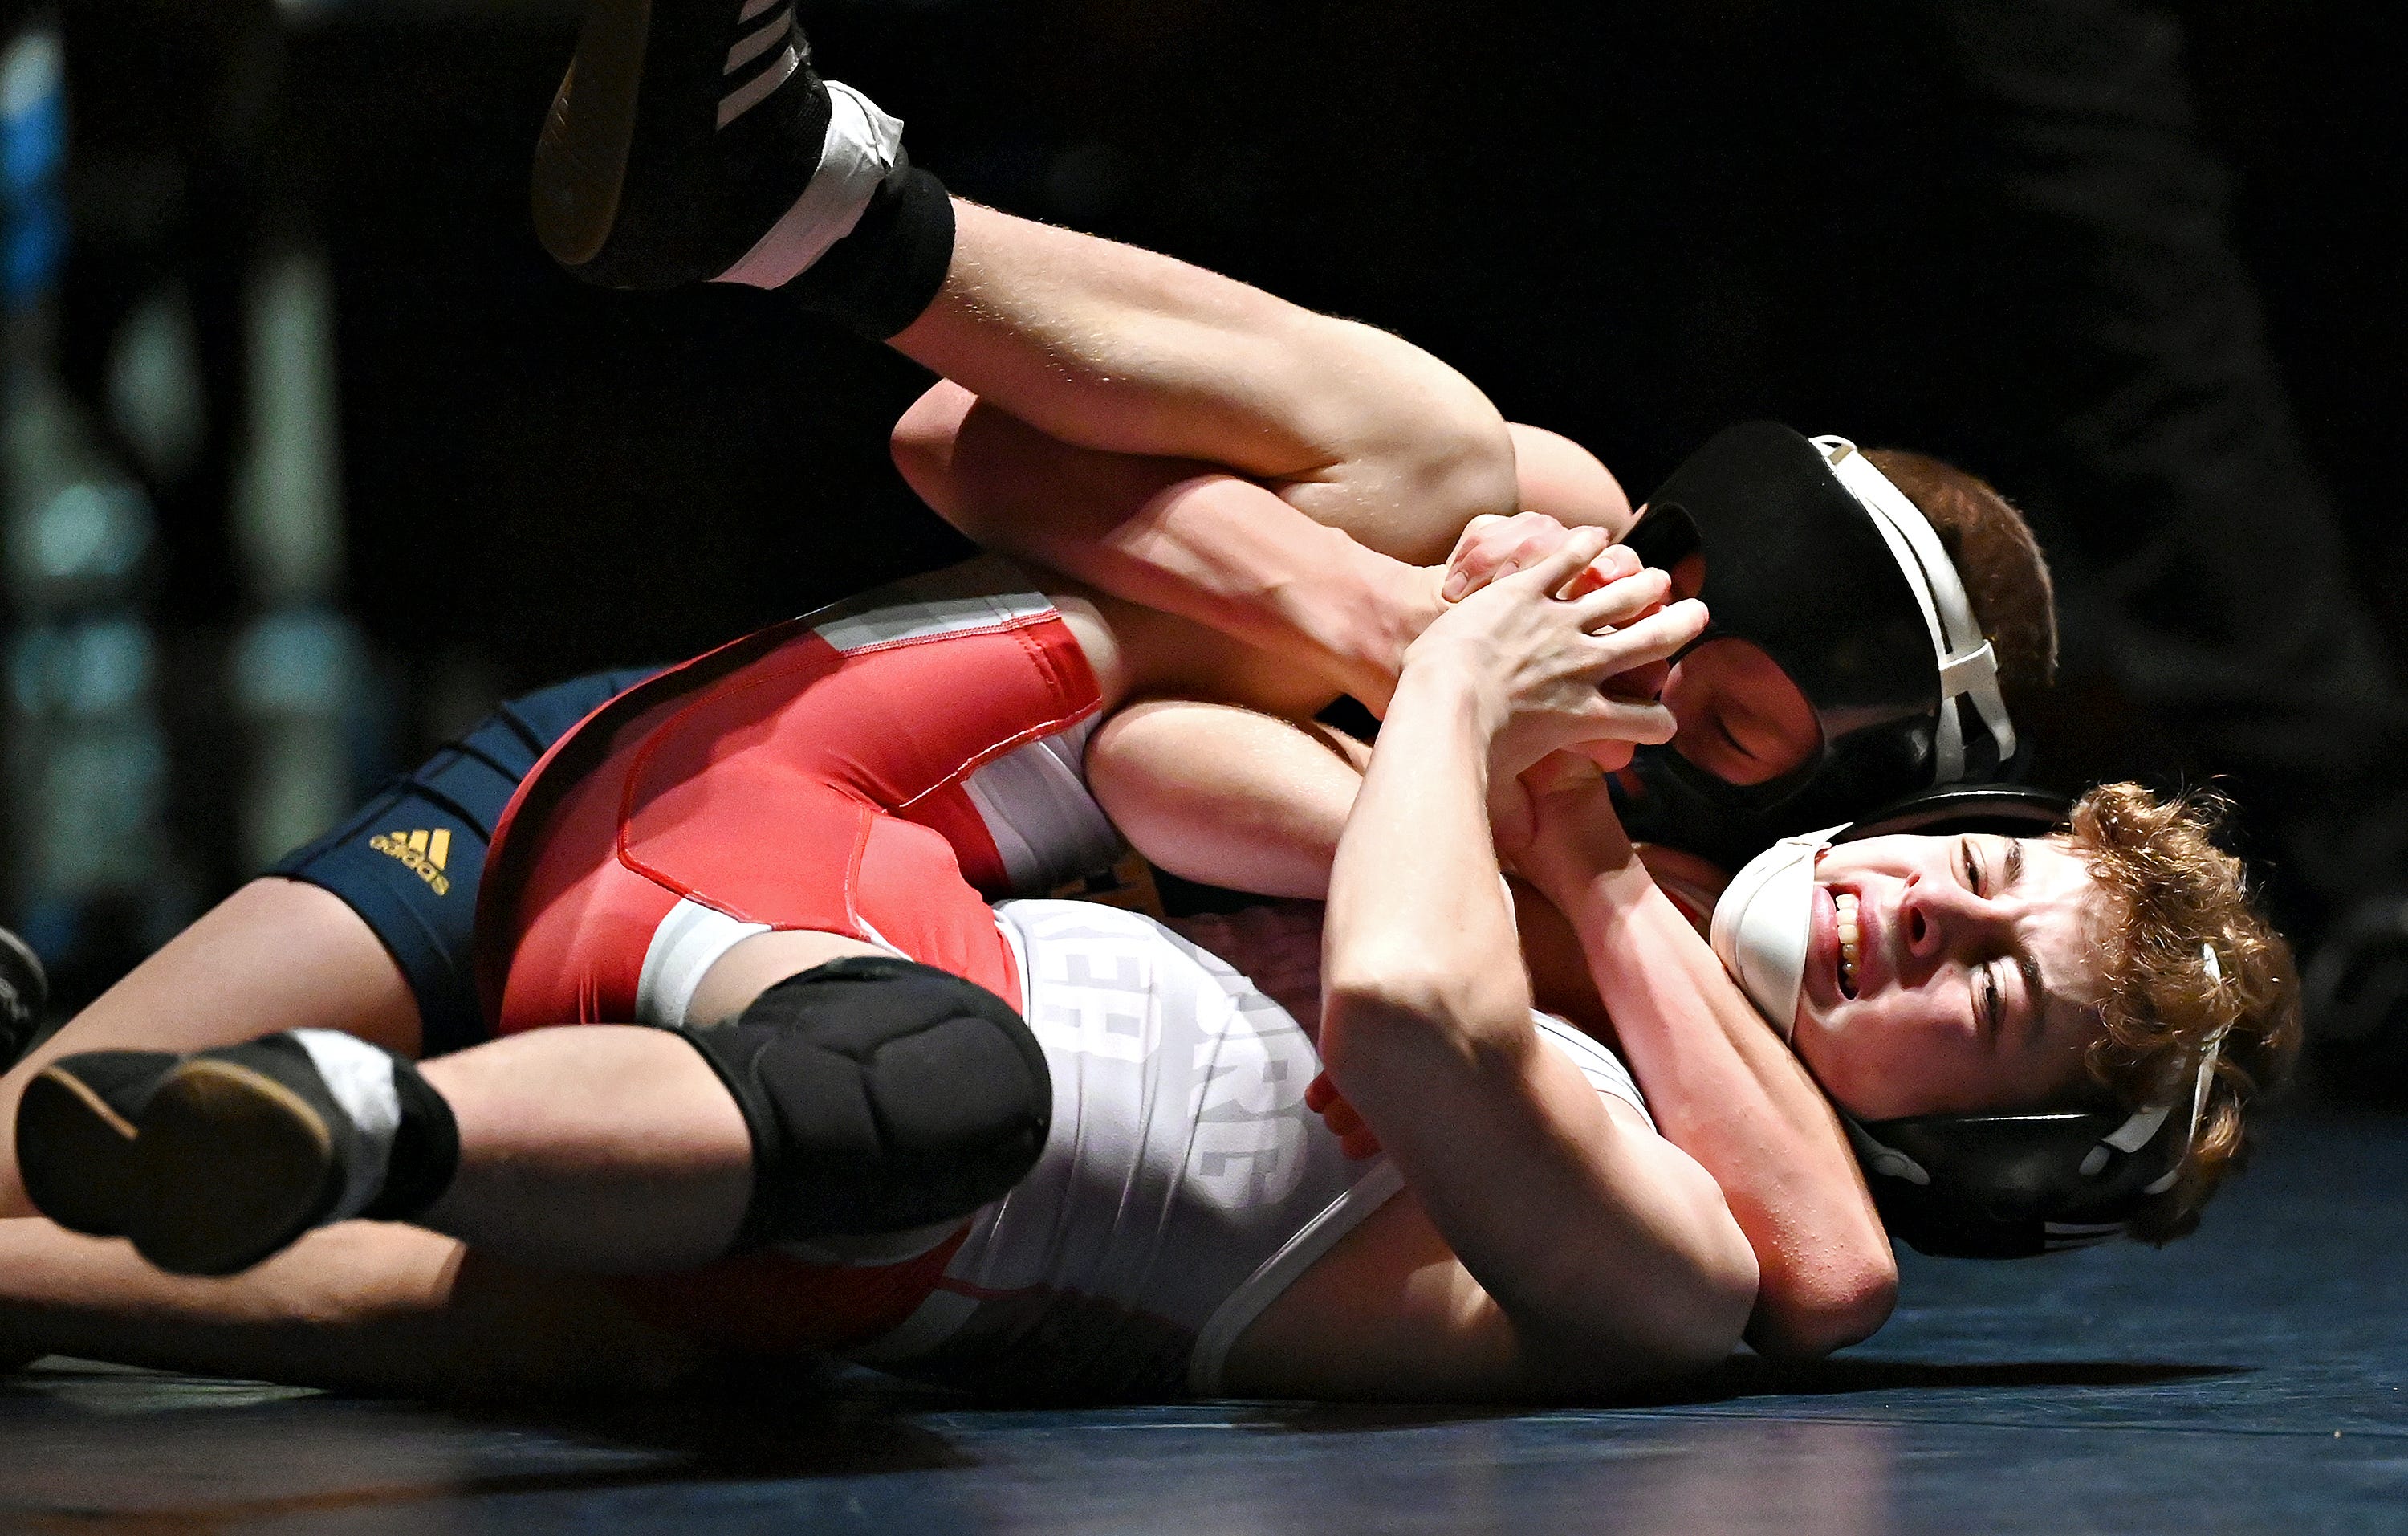 Eastern York’s Isaac Garner, back, and Hamburg’s Chase Denatala compete in the 114-pound weight class during PIAA District 3, Class 2-A first round wrestling action at Eastern York High School in Lower Windsor Township, Monday, Jan. 30, 2023. Garner would win with a pin at 1:30 and Eastern York would win the meet 50-22. Dawn J. Sagert photo